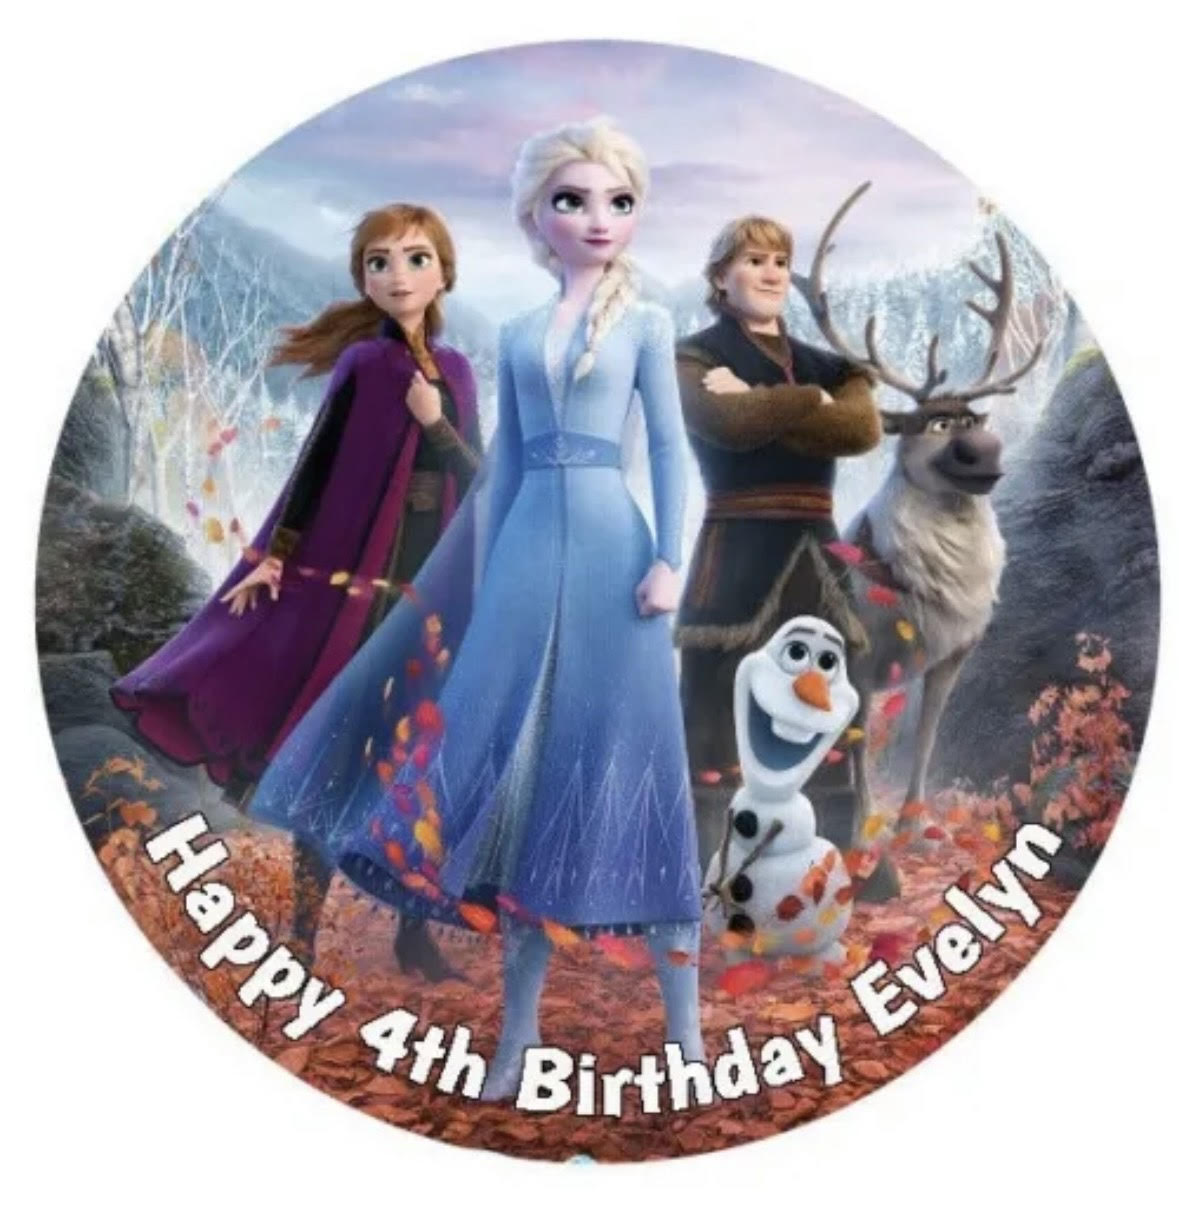 Frozen 2 Round Cake Edible Icing Image Topper 19cm